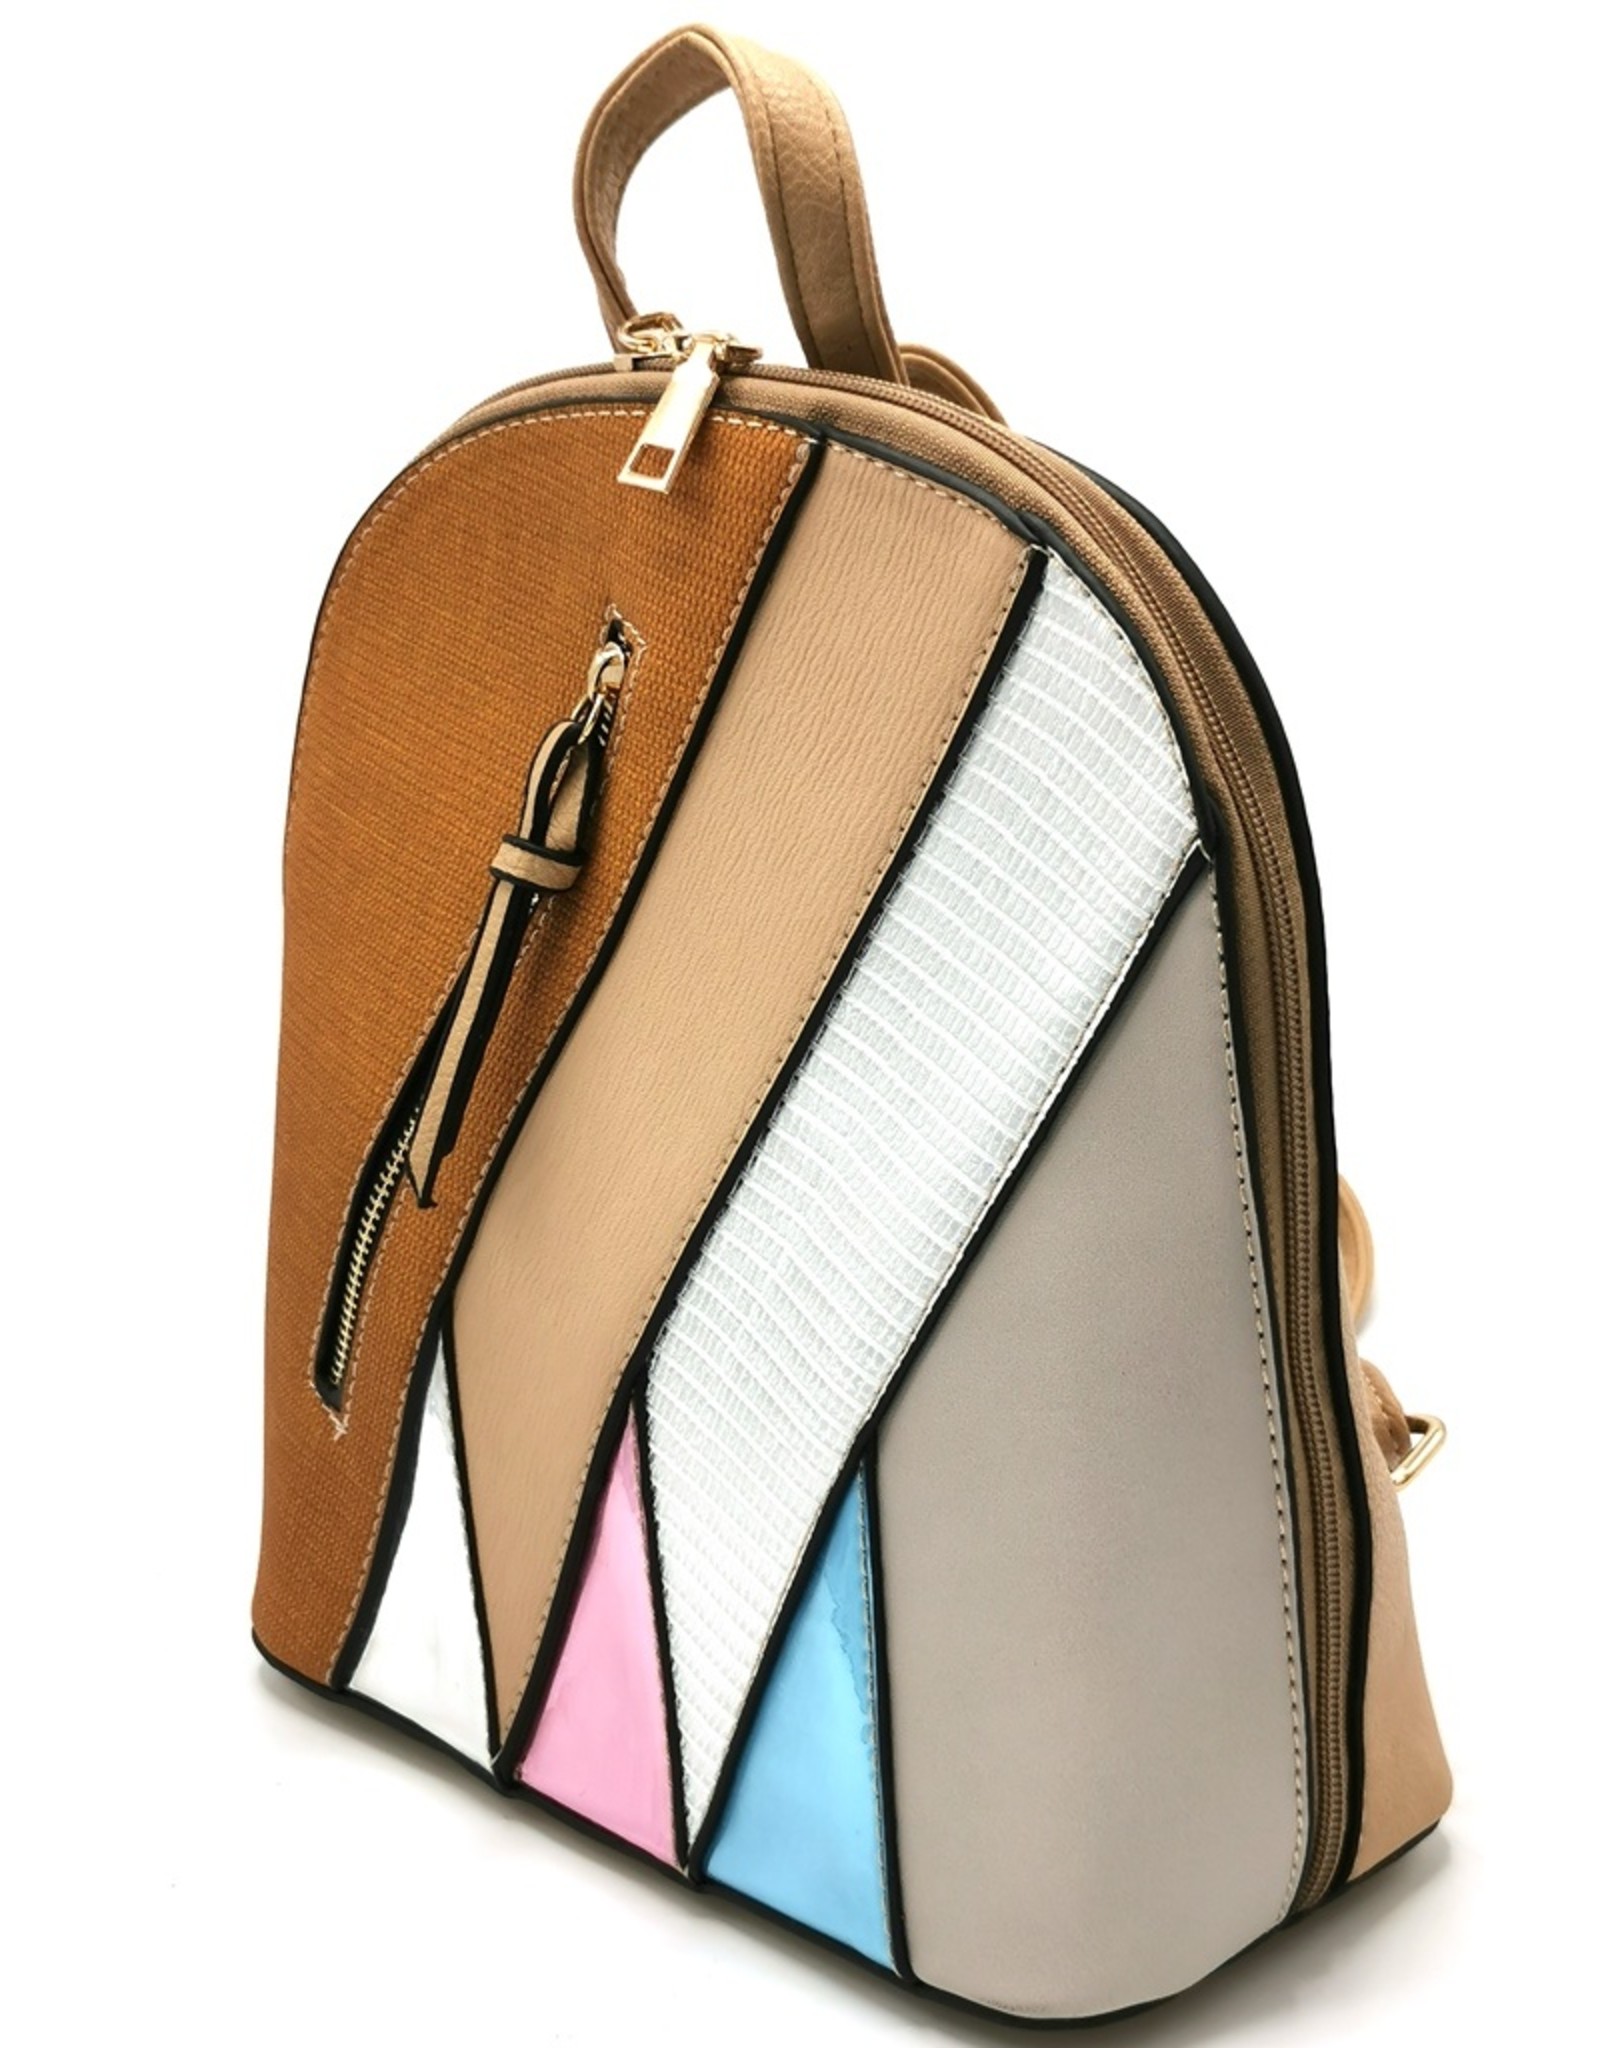 Trukado Backpacks and fanny packs - Fashion backpack with holographic accents brown